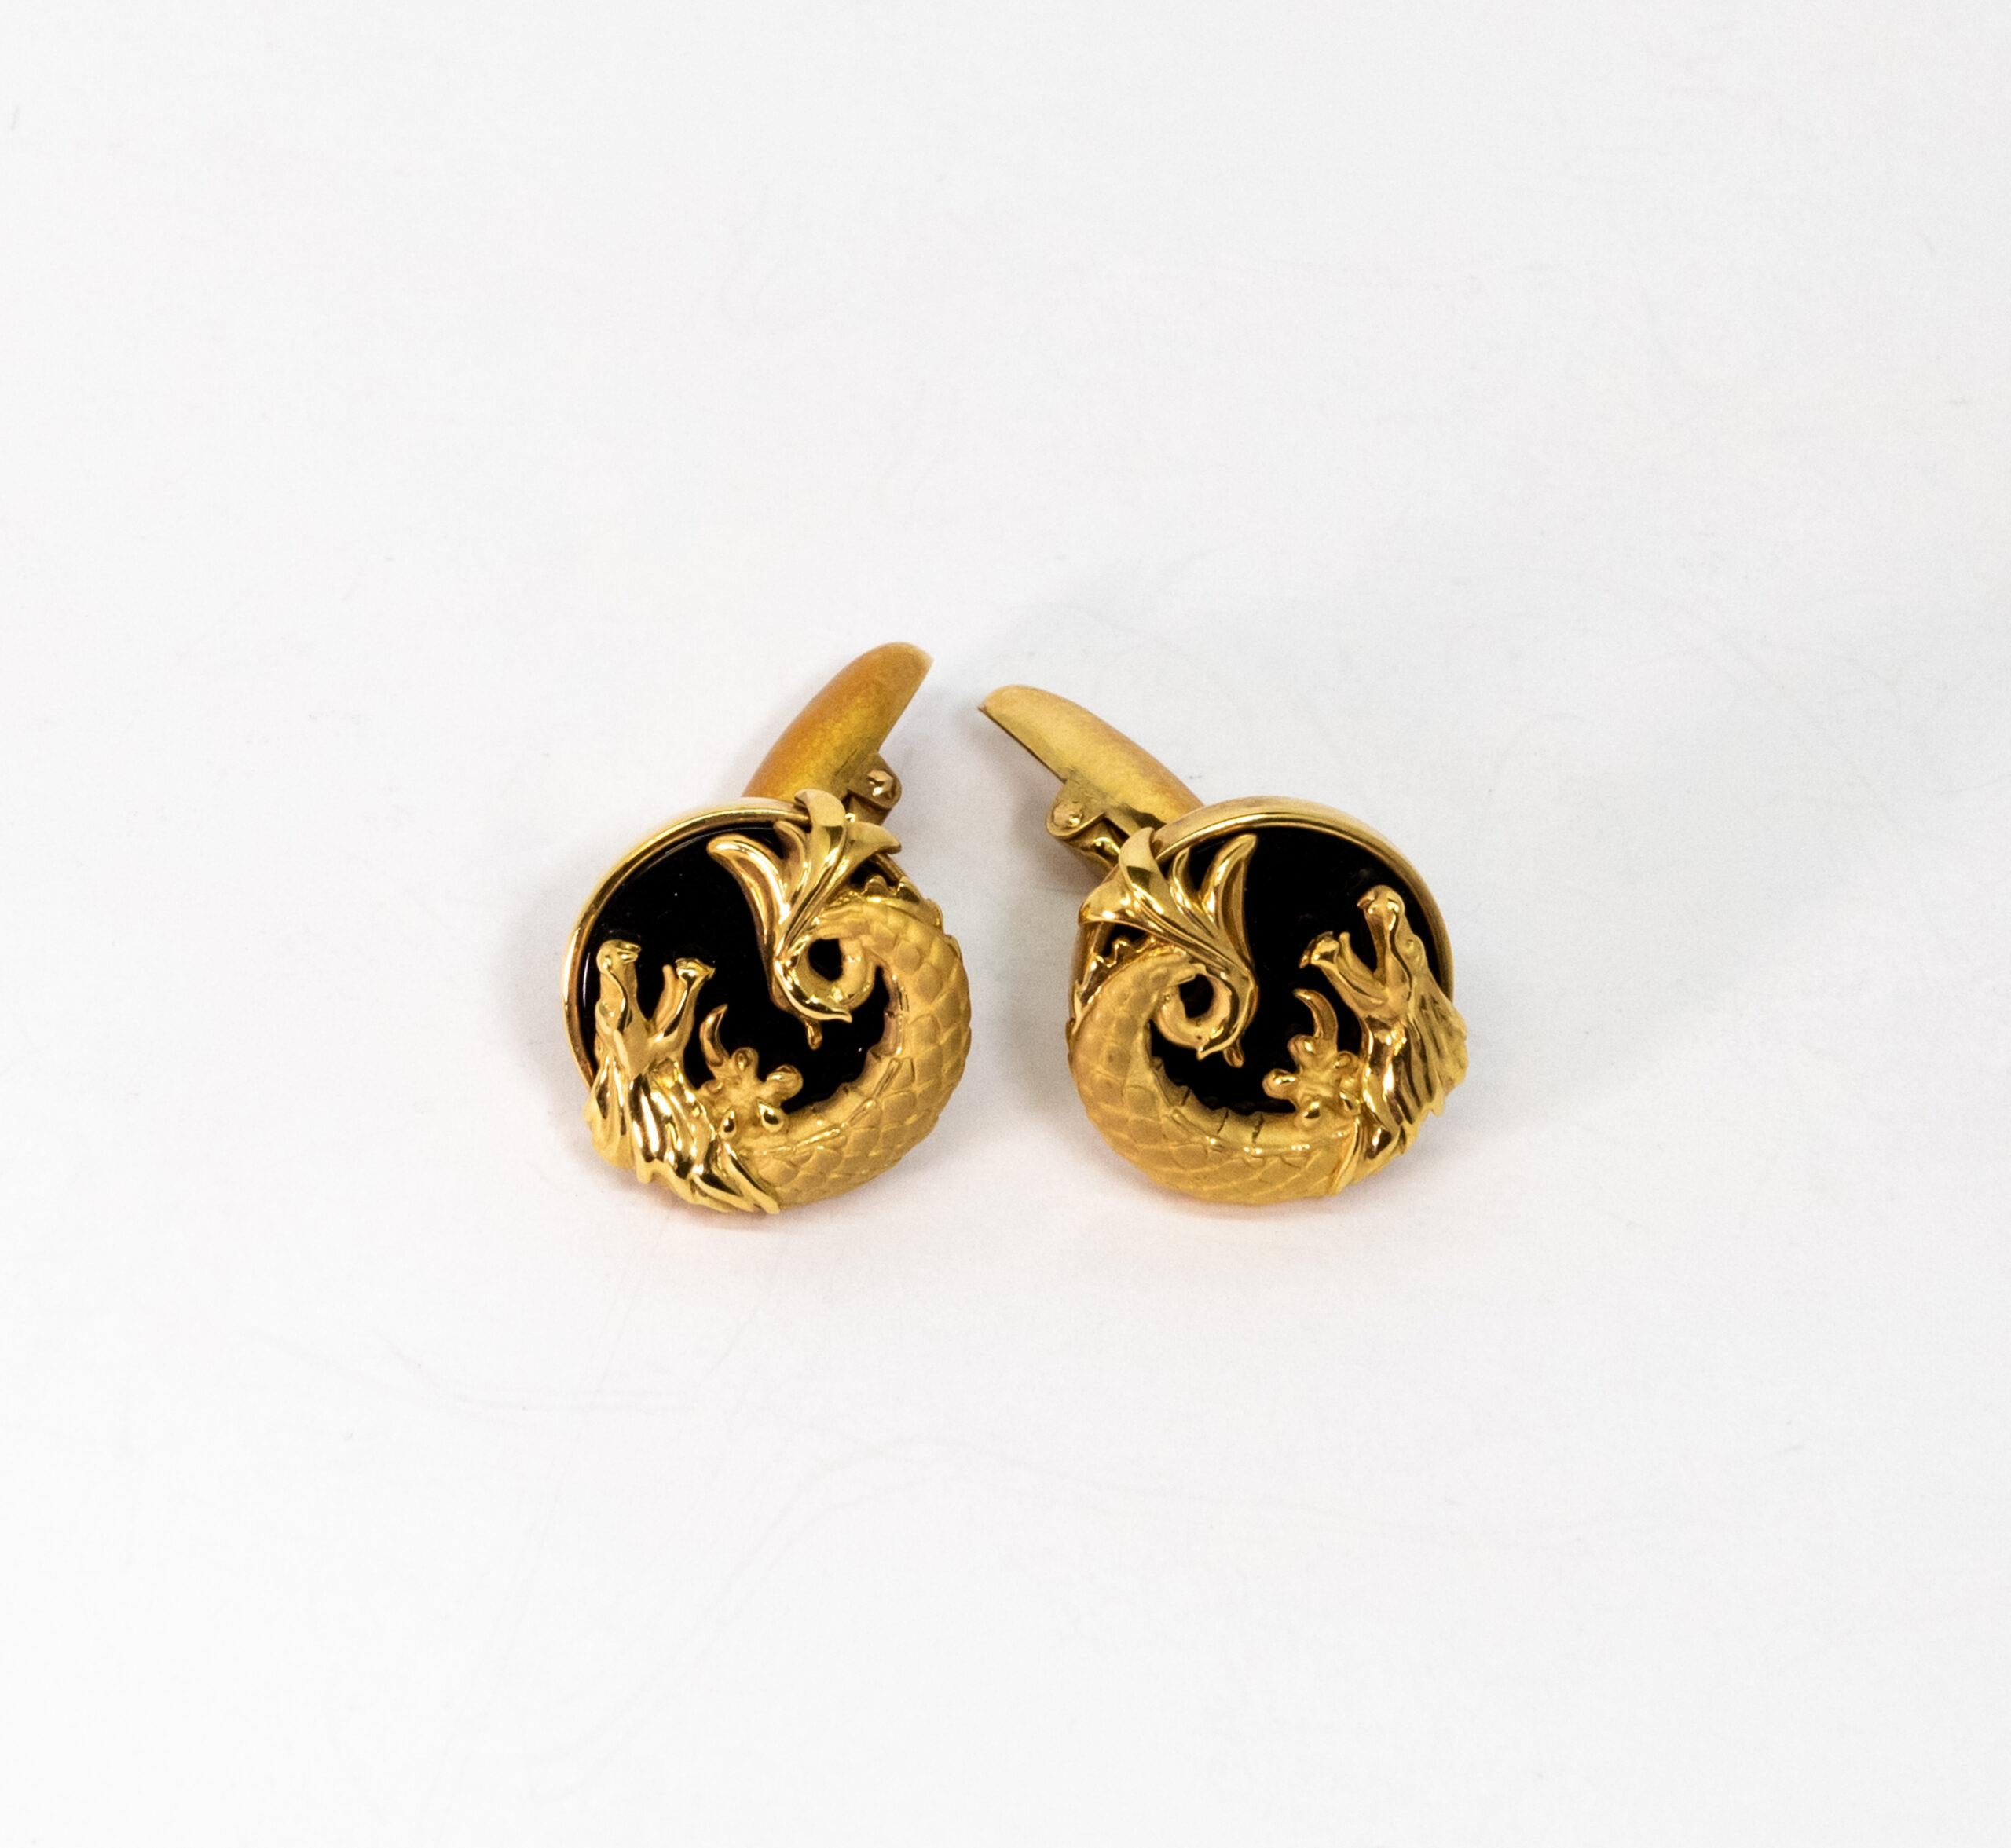 This cufflinks is made of 18K Yellow Gold. Face side made of black Onyx and decorated with a 18K Yellow Gold dragon figure.